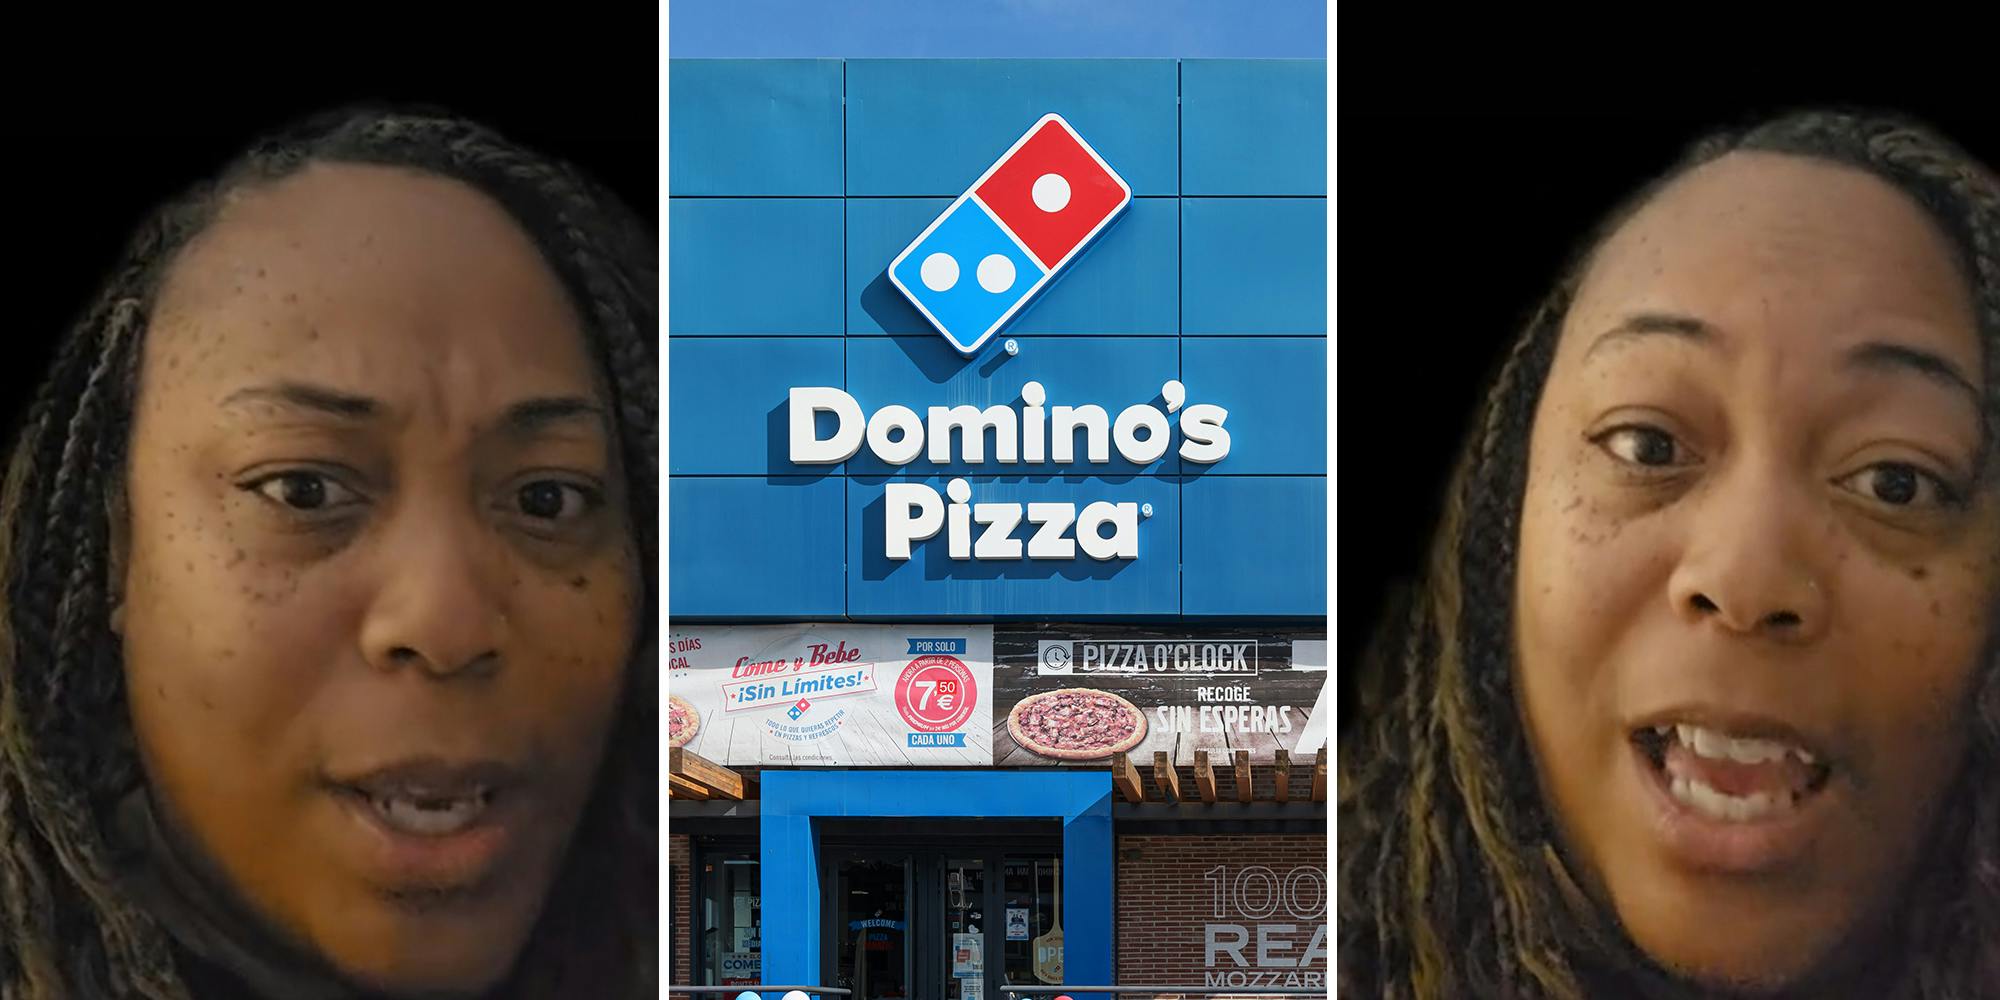 Domino’s customer files complaint over order. Worker tells her not to order there anymore